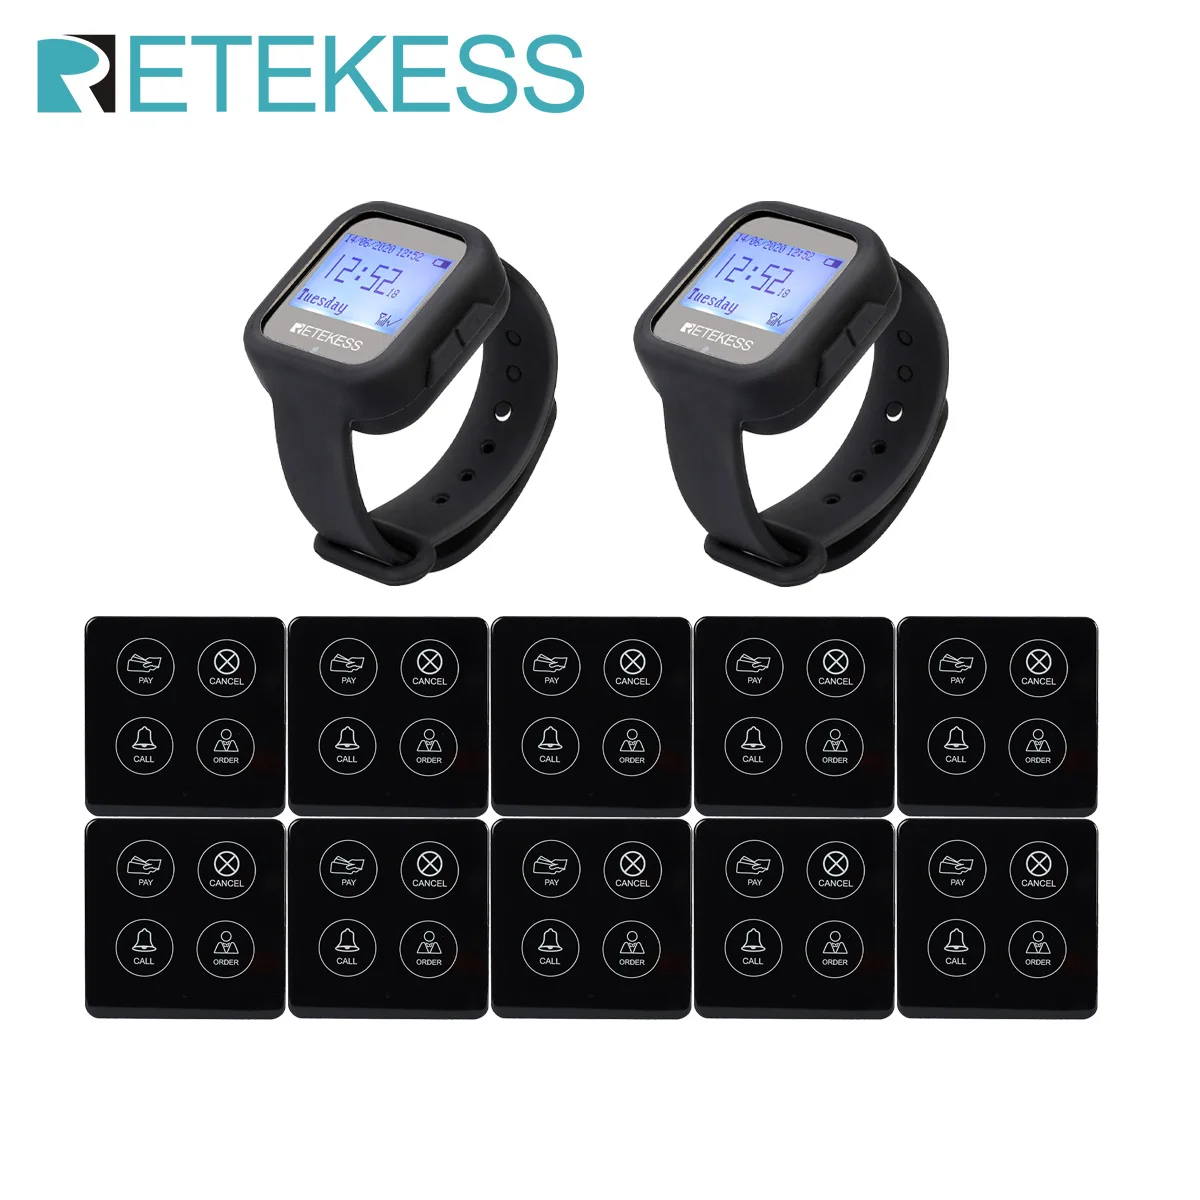 Retekess Restaurant Pager Wireless Waiter Calling System 2 TD106 Waterproof Watch Receiver 10 TD033 Call Buttons For Hookah Cafe